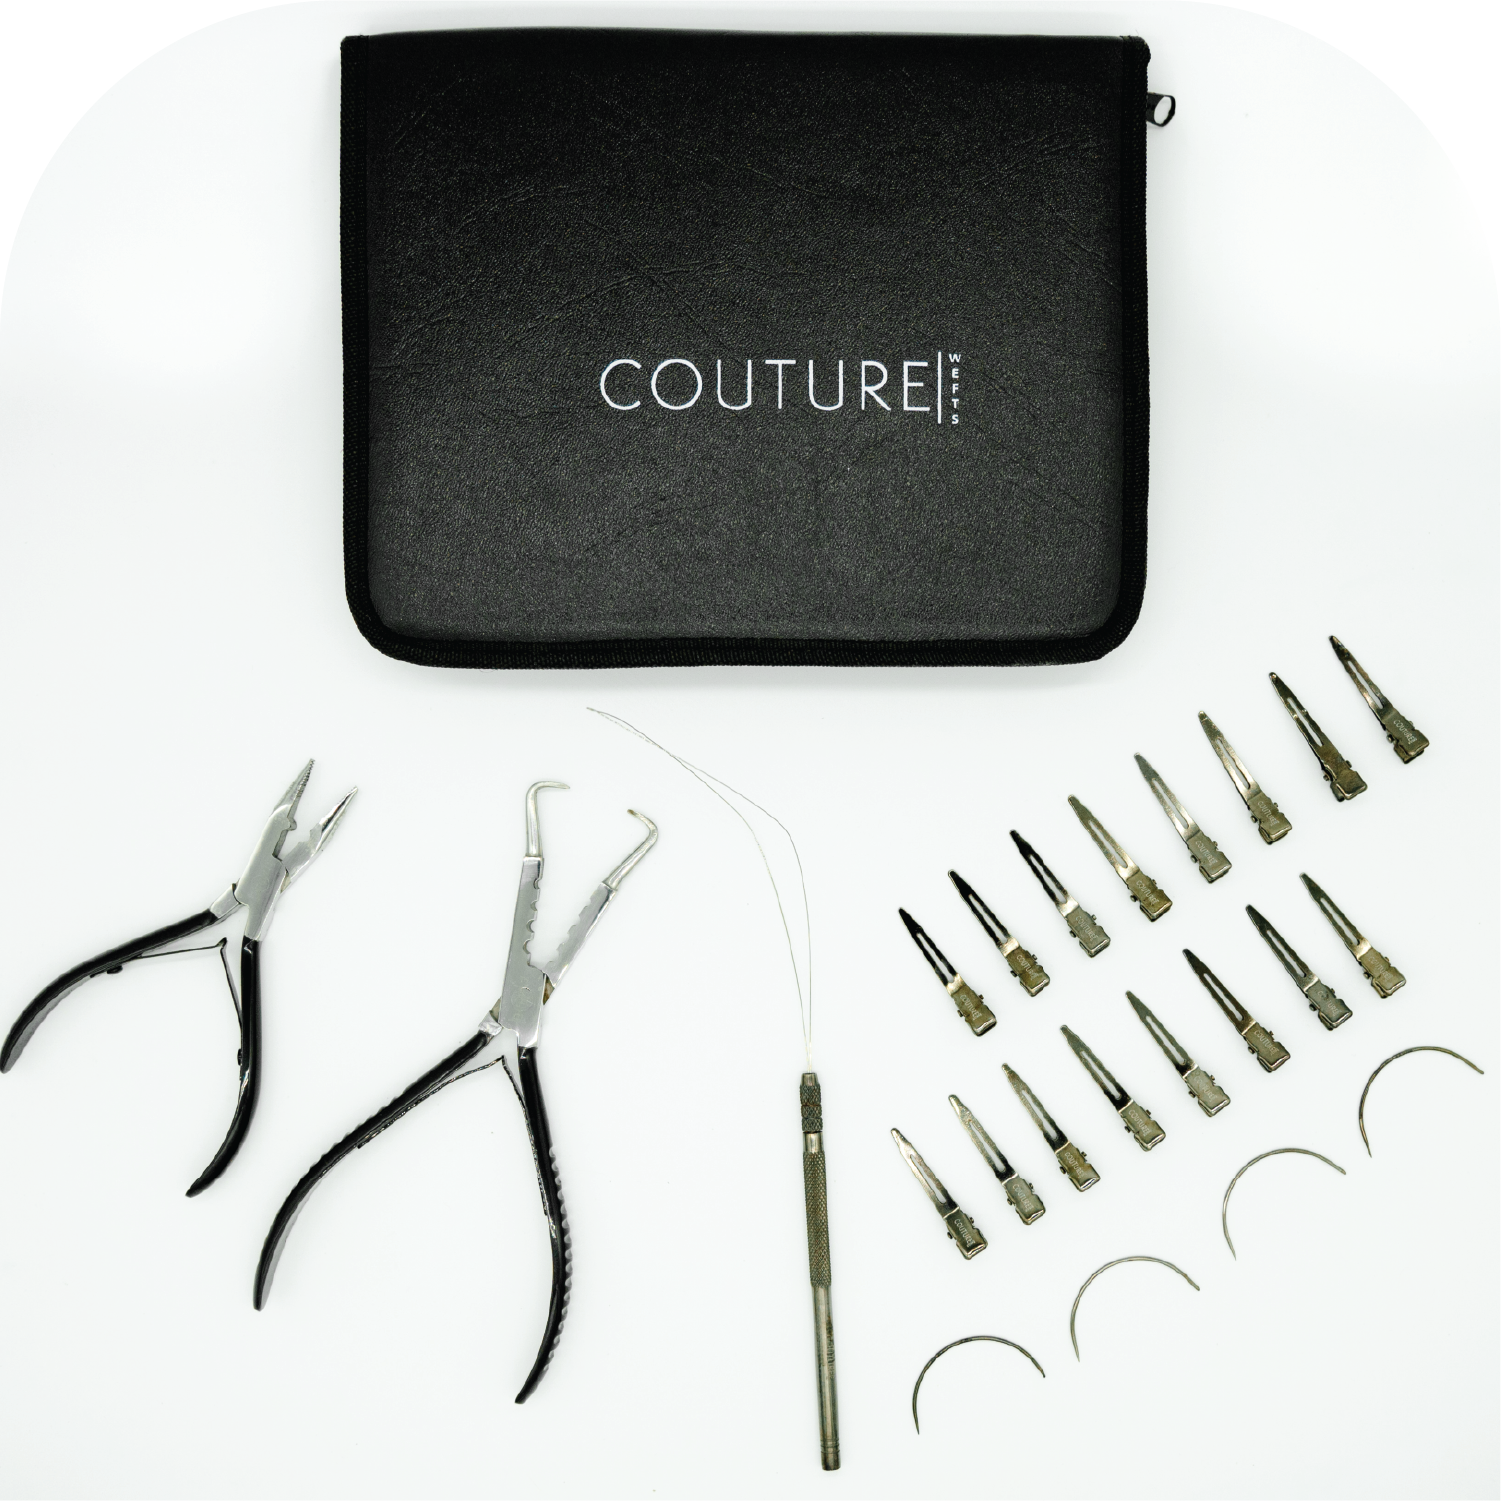 Couture Hair Co. Couture Weft Full Kit. Showing tools and tool case